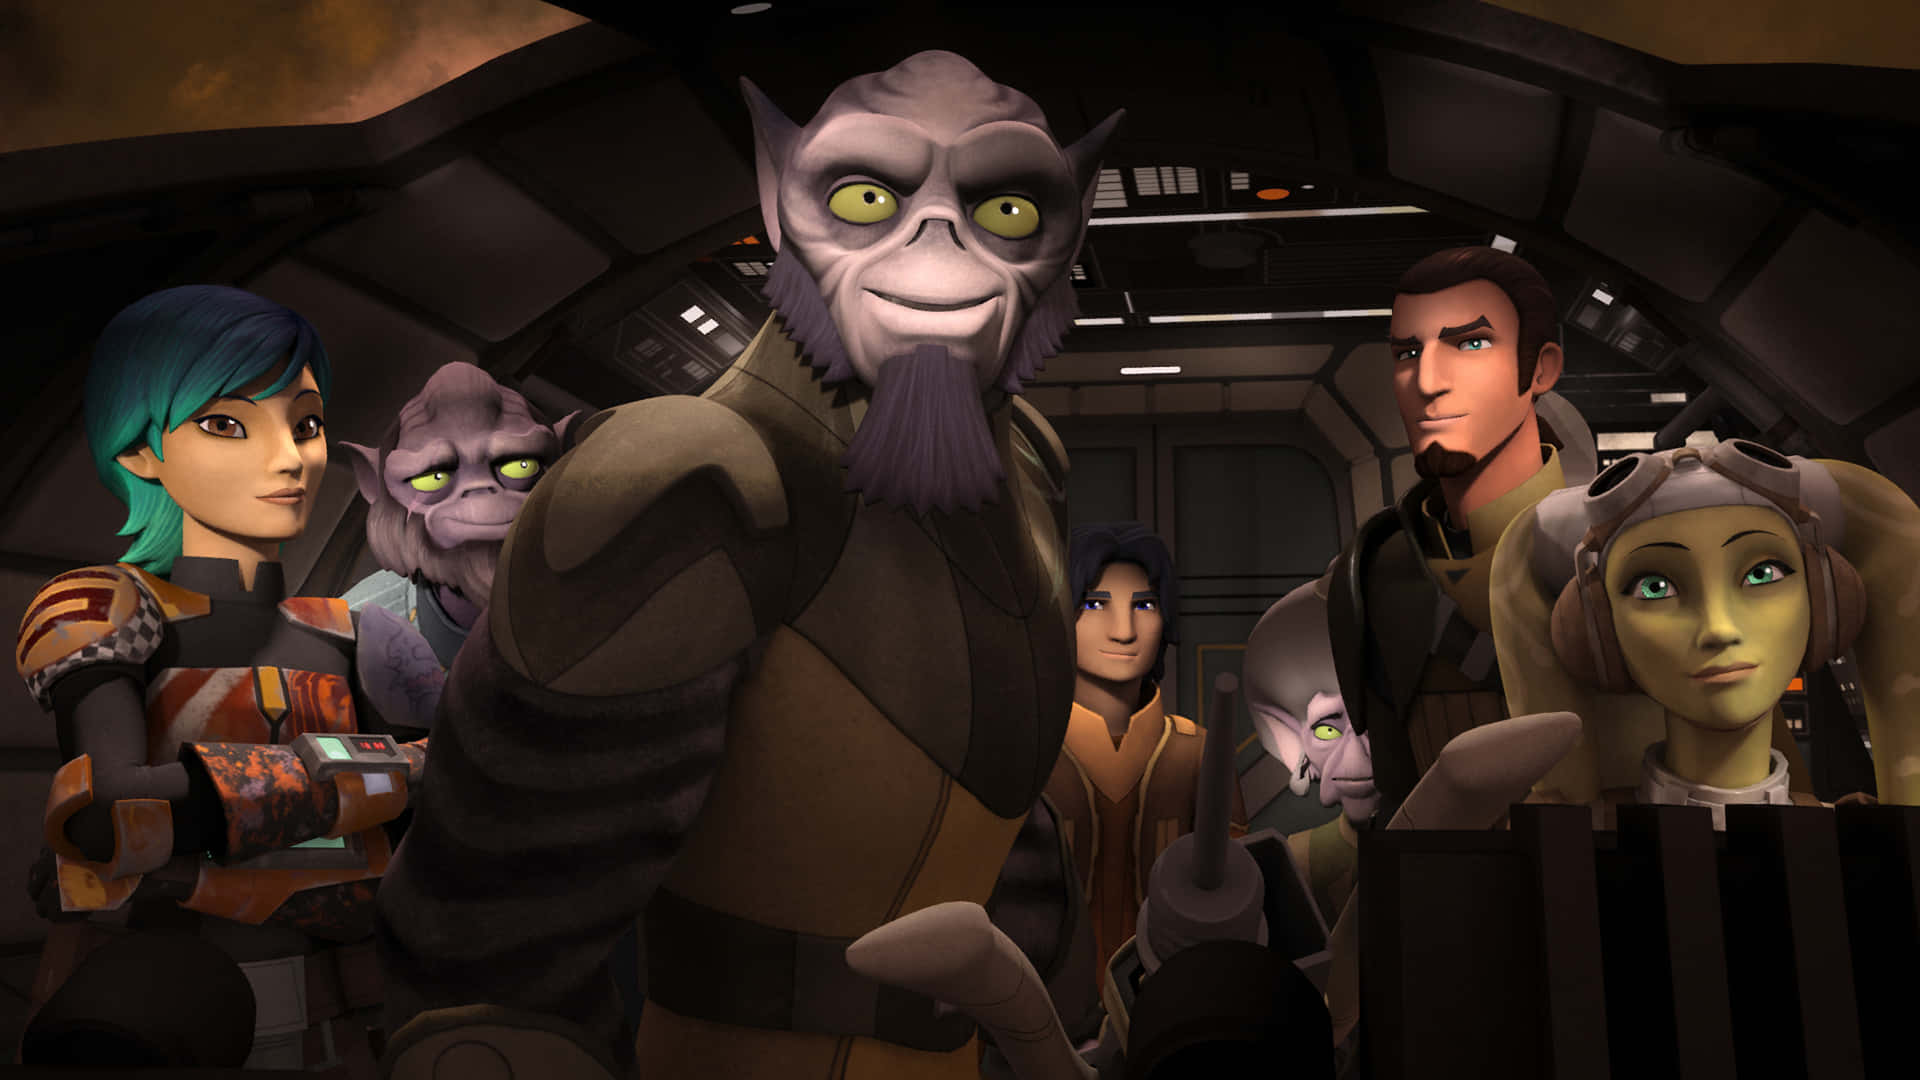 Zeb Orrelios, a youthful and assertive intergalactic soldier." Wallpaper